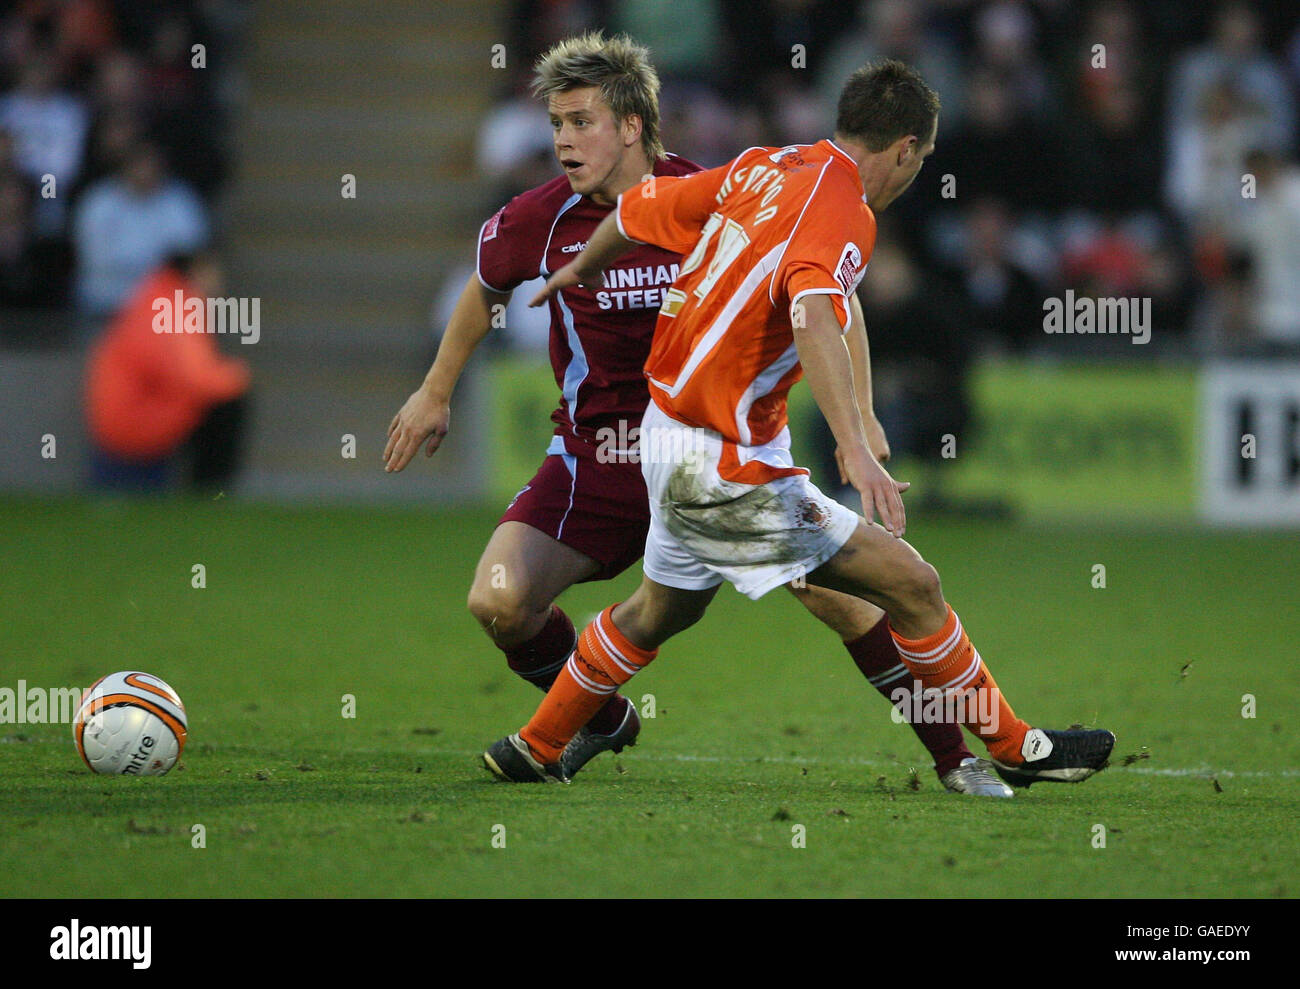 Blackpool's Tony McMahon and Scuntorpe United's Kevan Hurst during the Coca-Cola Football League Championship match at Bloomfield Road, Blackpool. Stock Photo